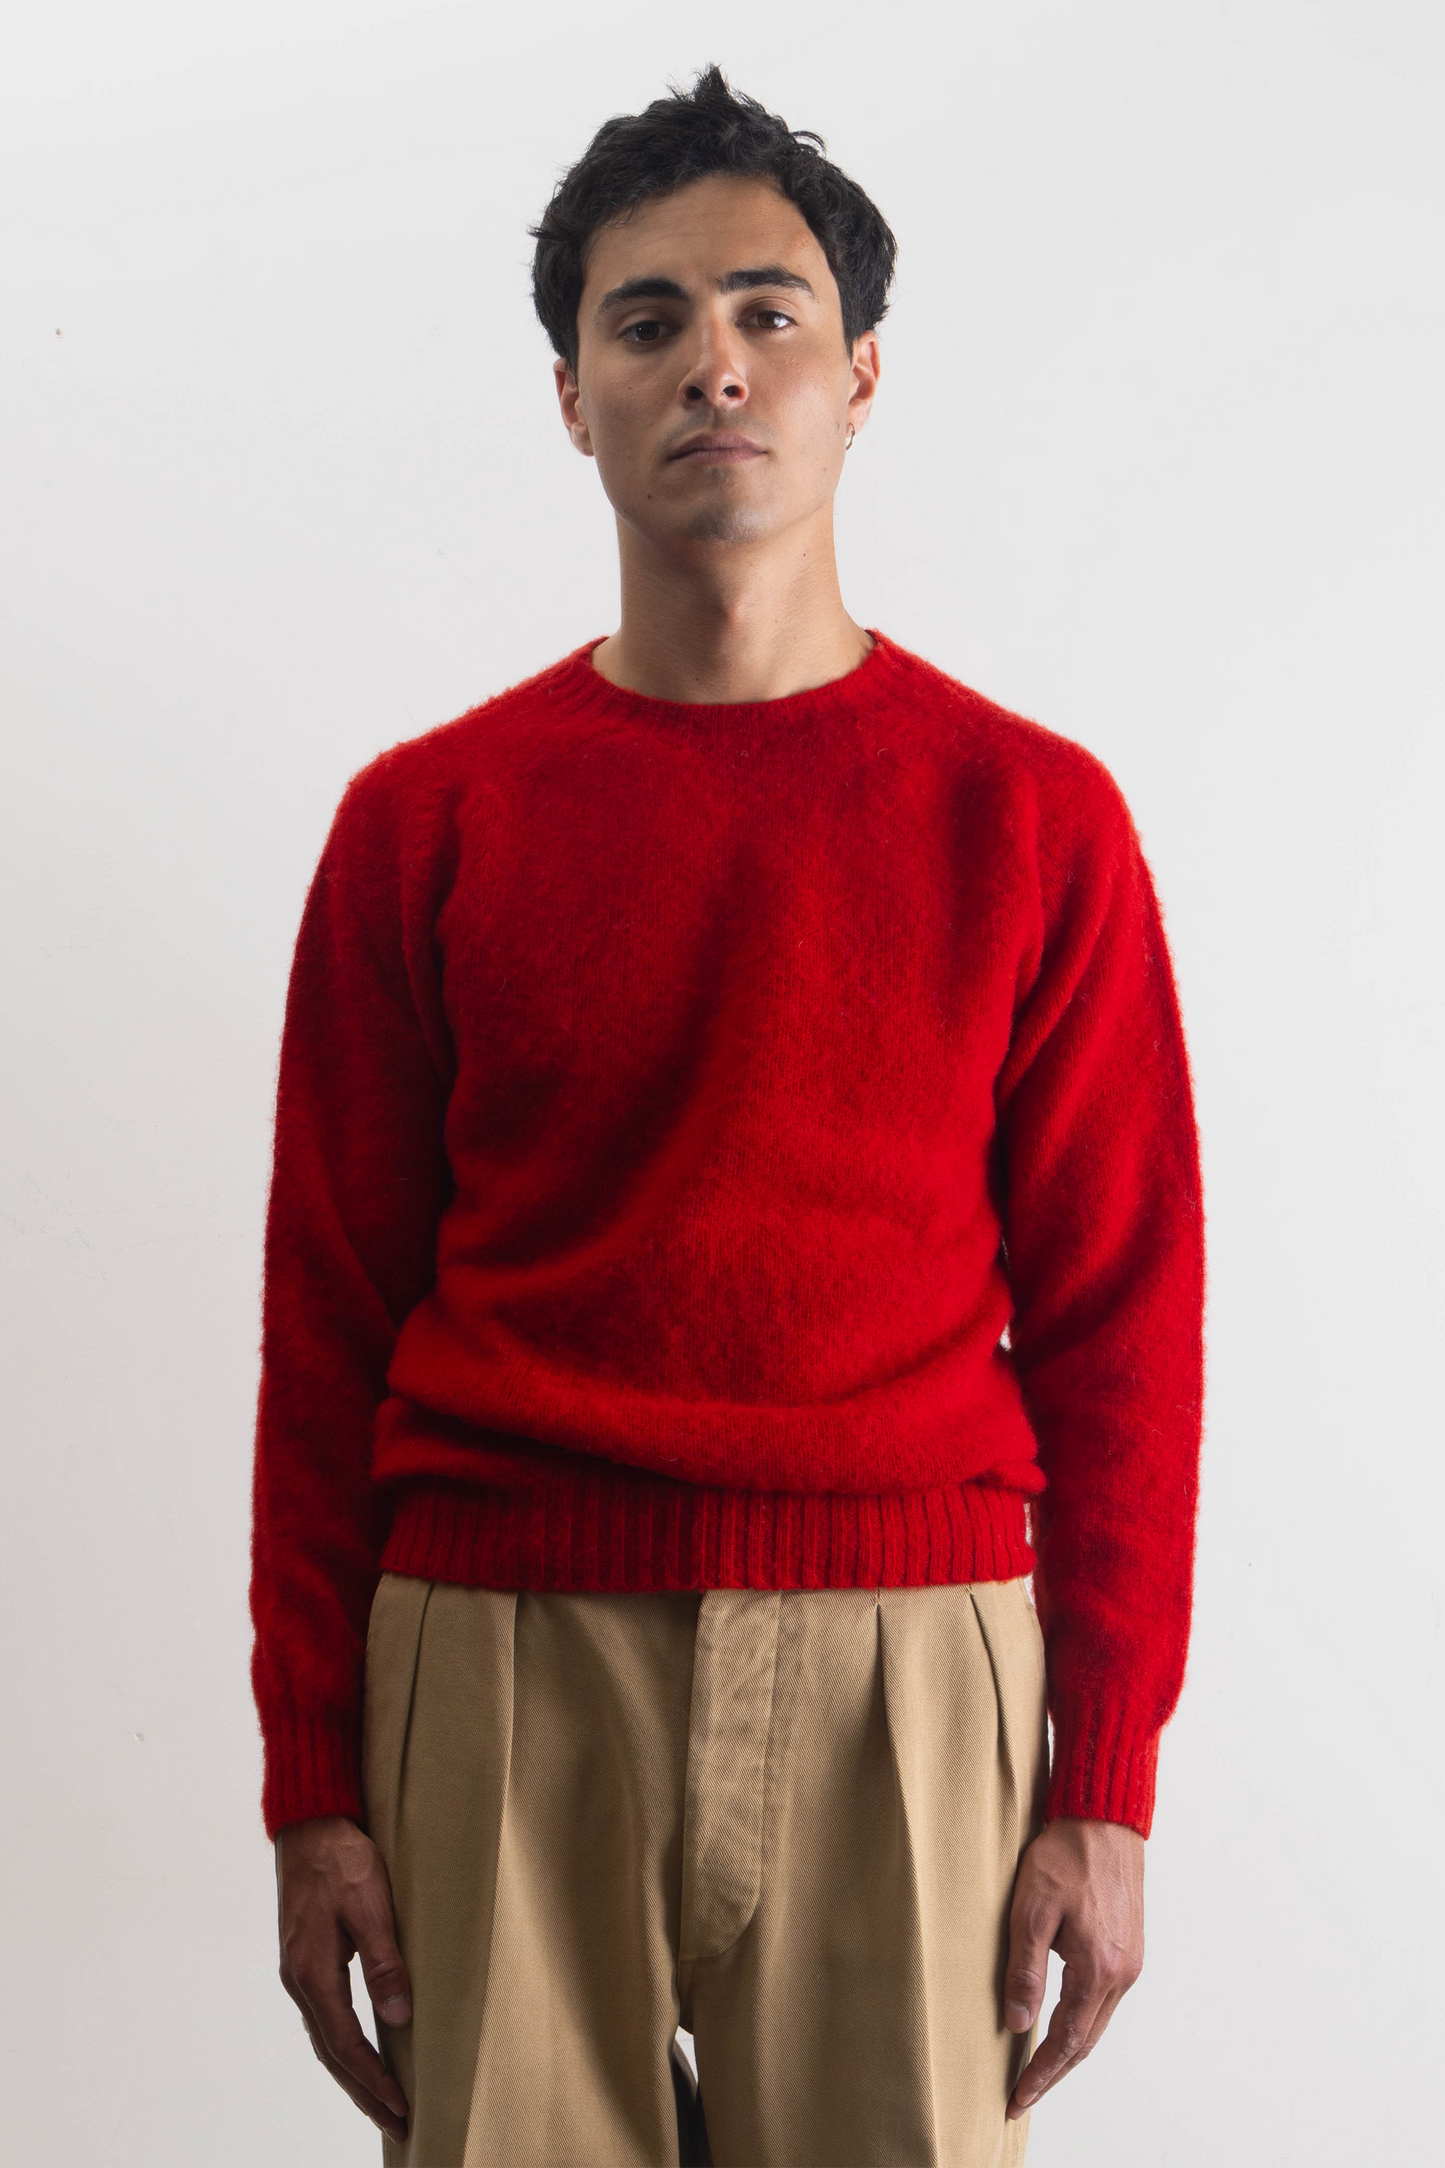 Shaggy Dog sweater in red wool